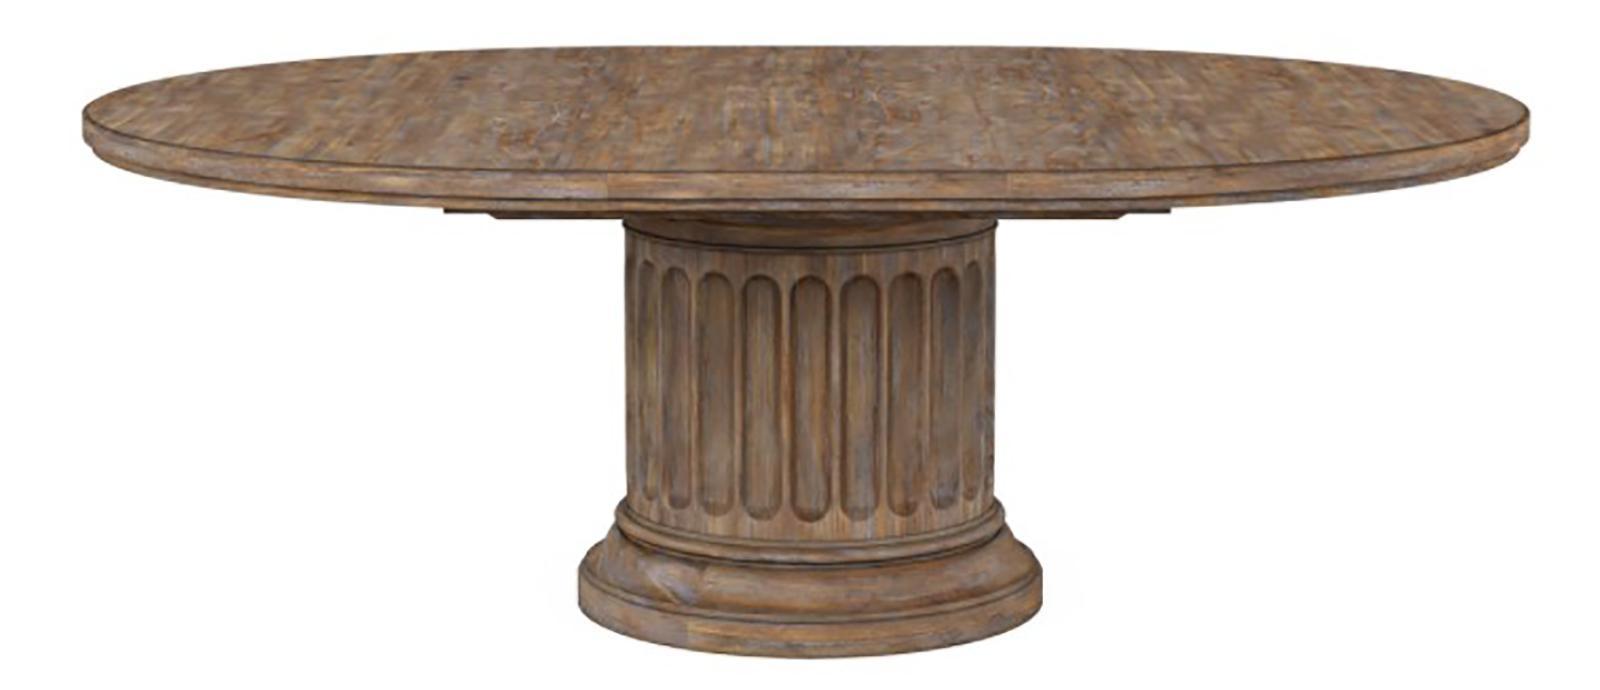 Furniture Architrave Round Dining Table in Rustic Pine